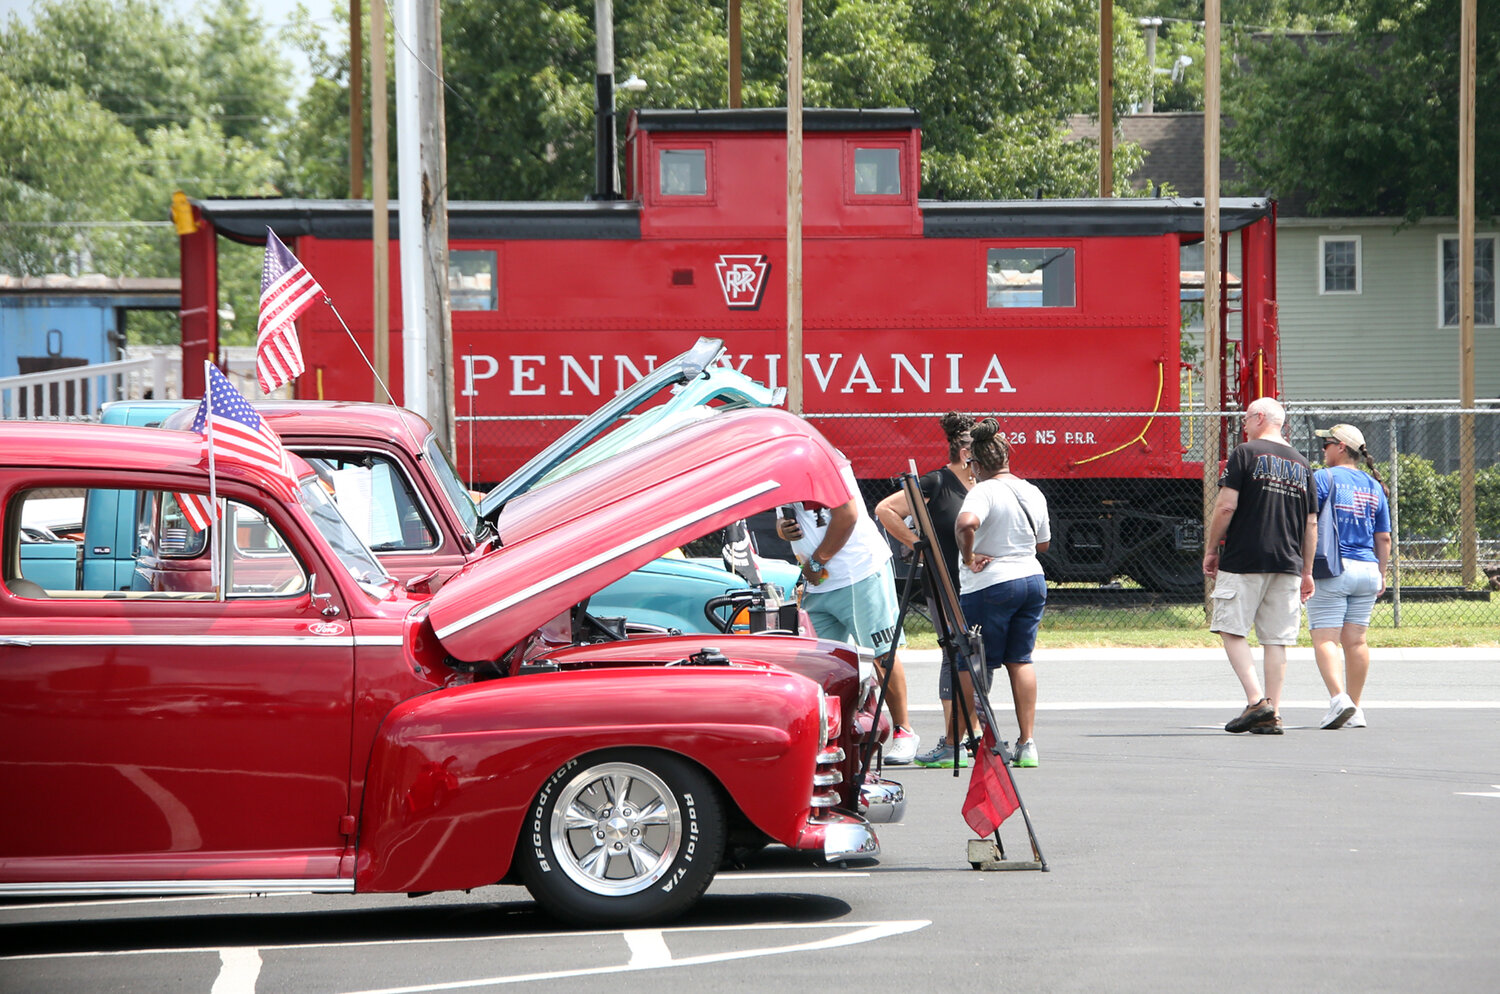 Across the street from the Harrington Historical Society's caboose, car enthusiasts enjoyed a show of classic cars in the M&T Bank parking lot Saturday at Heritage Day.